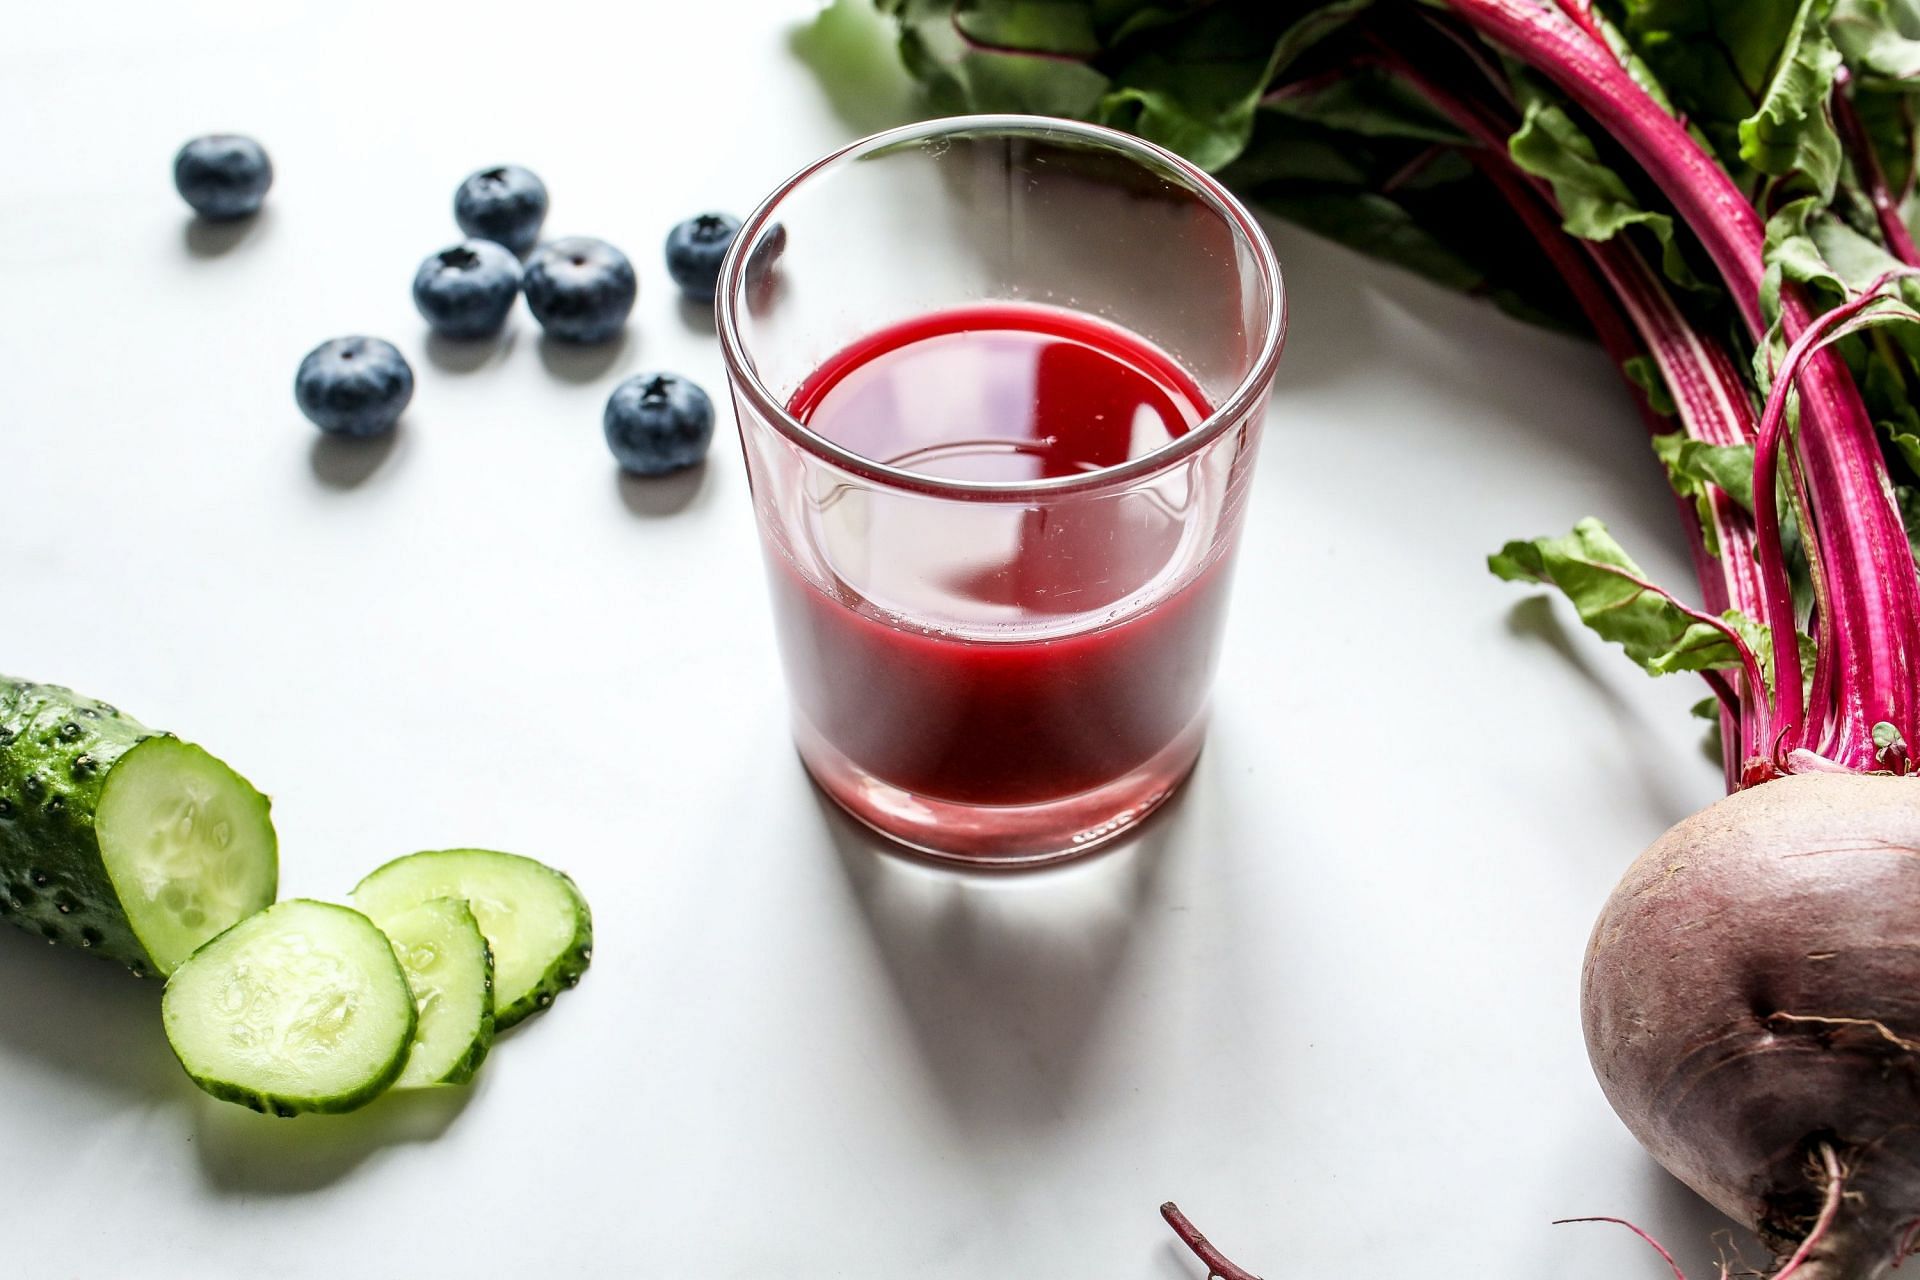 Beetroot juice benefits (image sourced via Pexels / Photo by Polina)